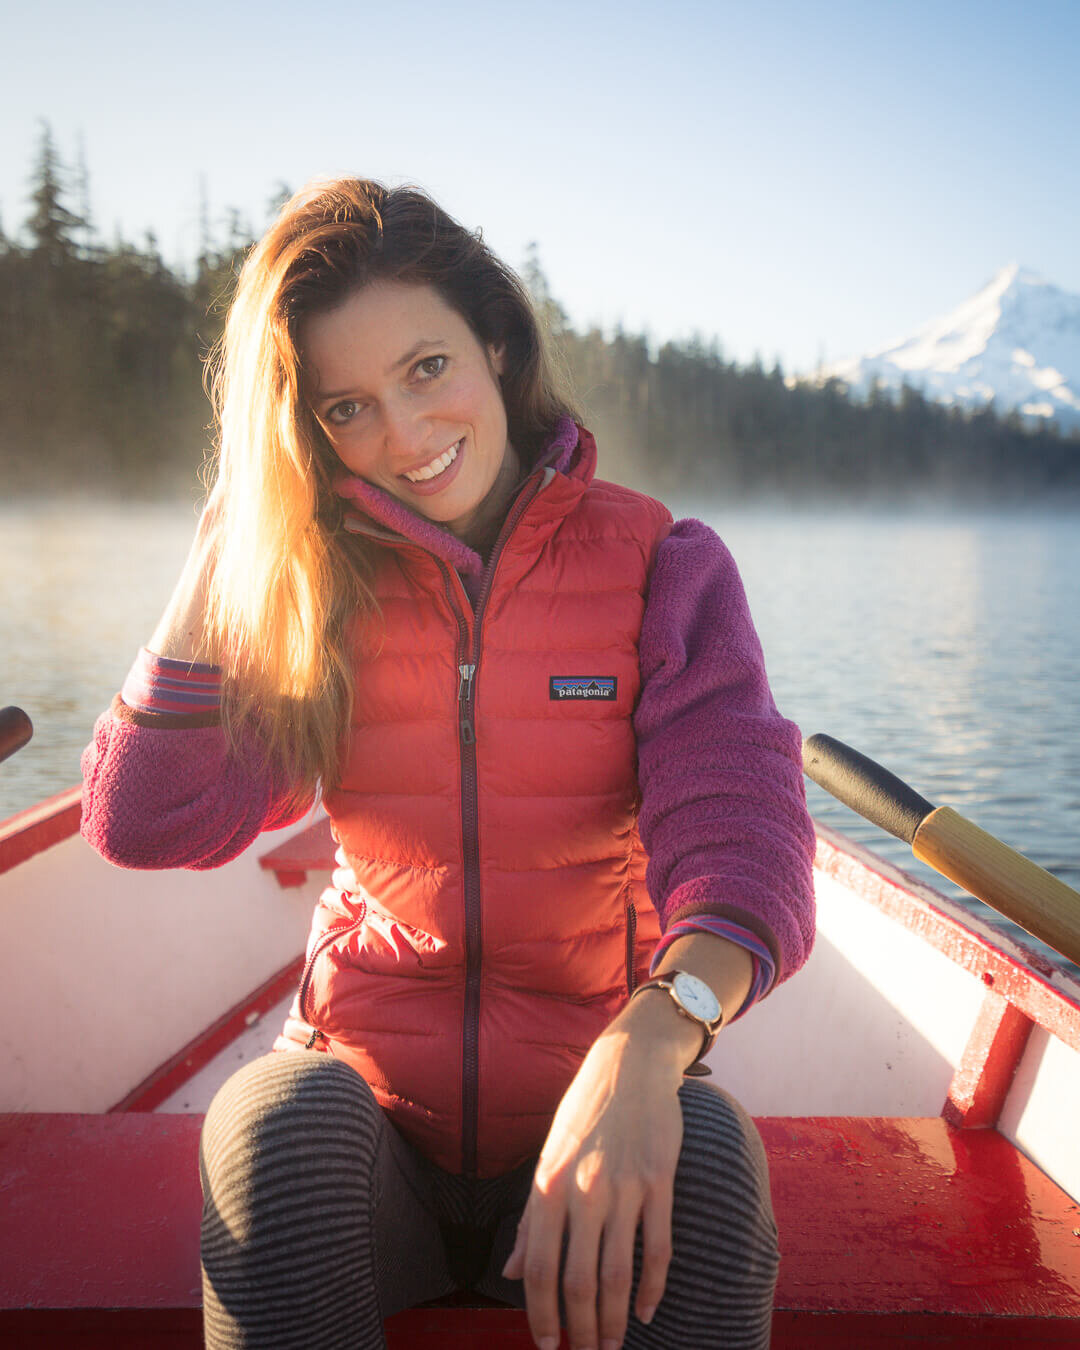 Patagonia has a long history of prioritizing sustainability in their outdoor clothing. Wearing:  Patagonia Down Sweater Vest  over the  Patagonia Re-Tool Snap-T Fleece Pullover .